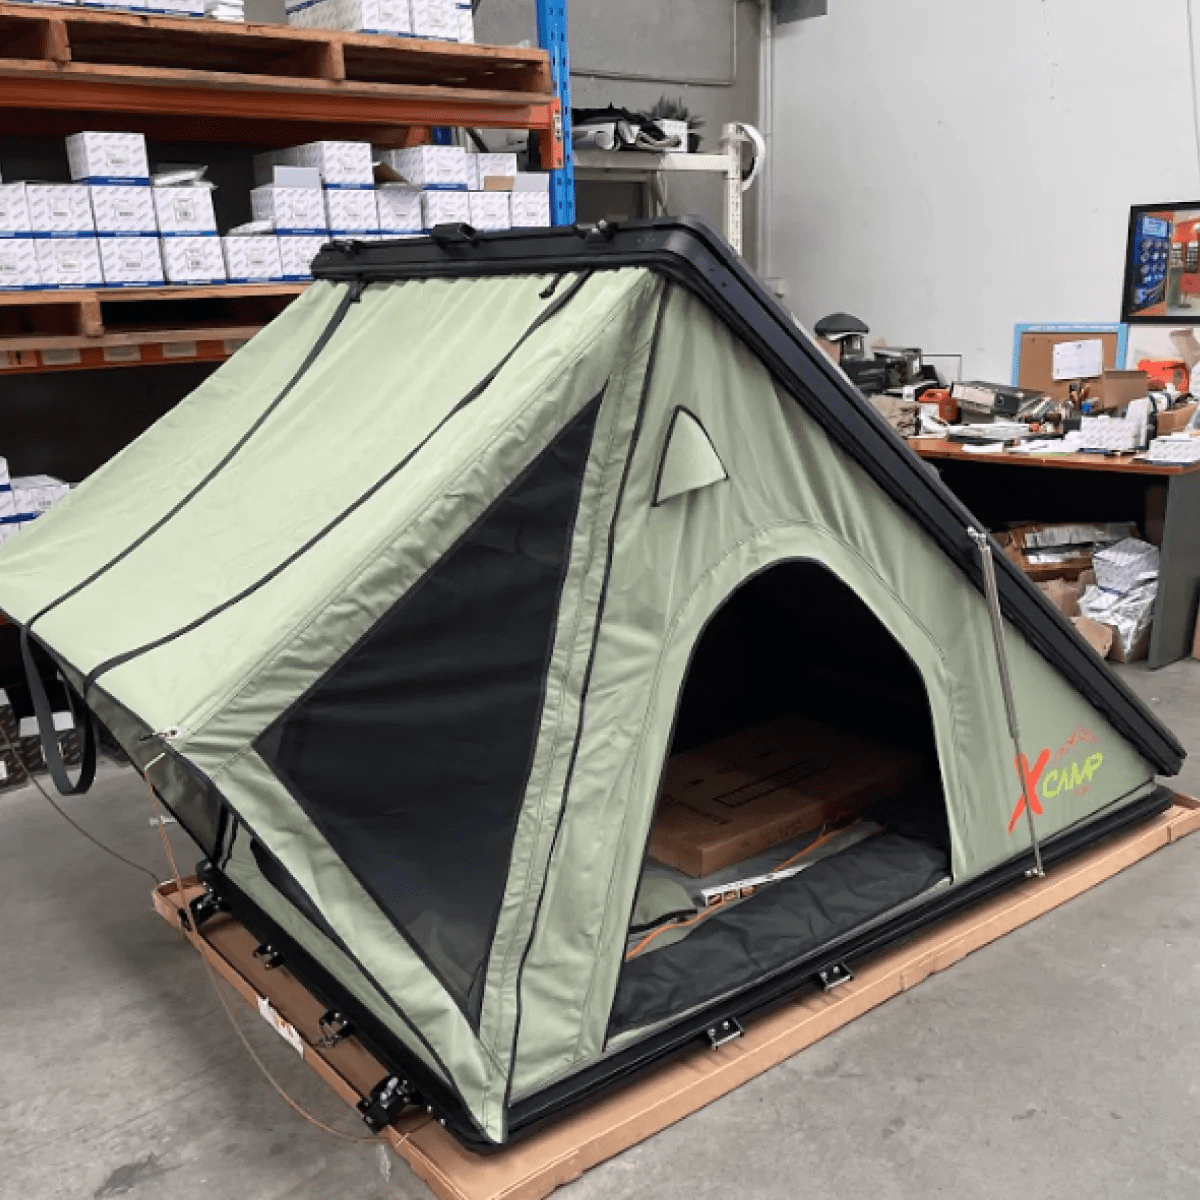 Xcamp cx250 Hard Shell Rooftop - Army Green